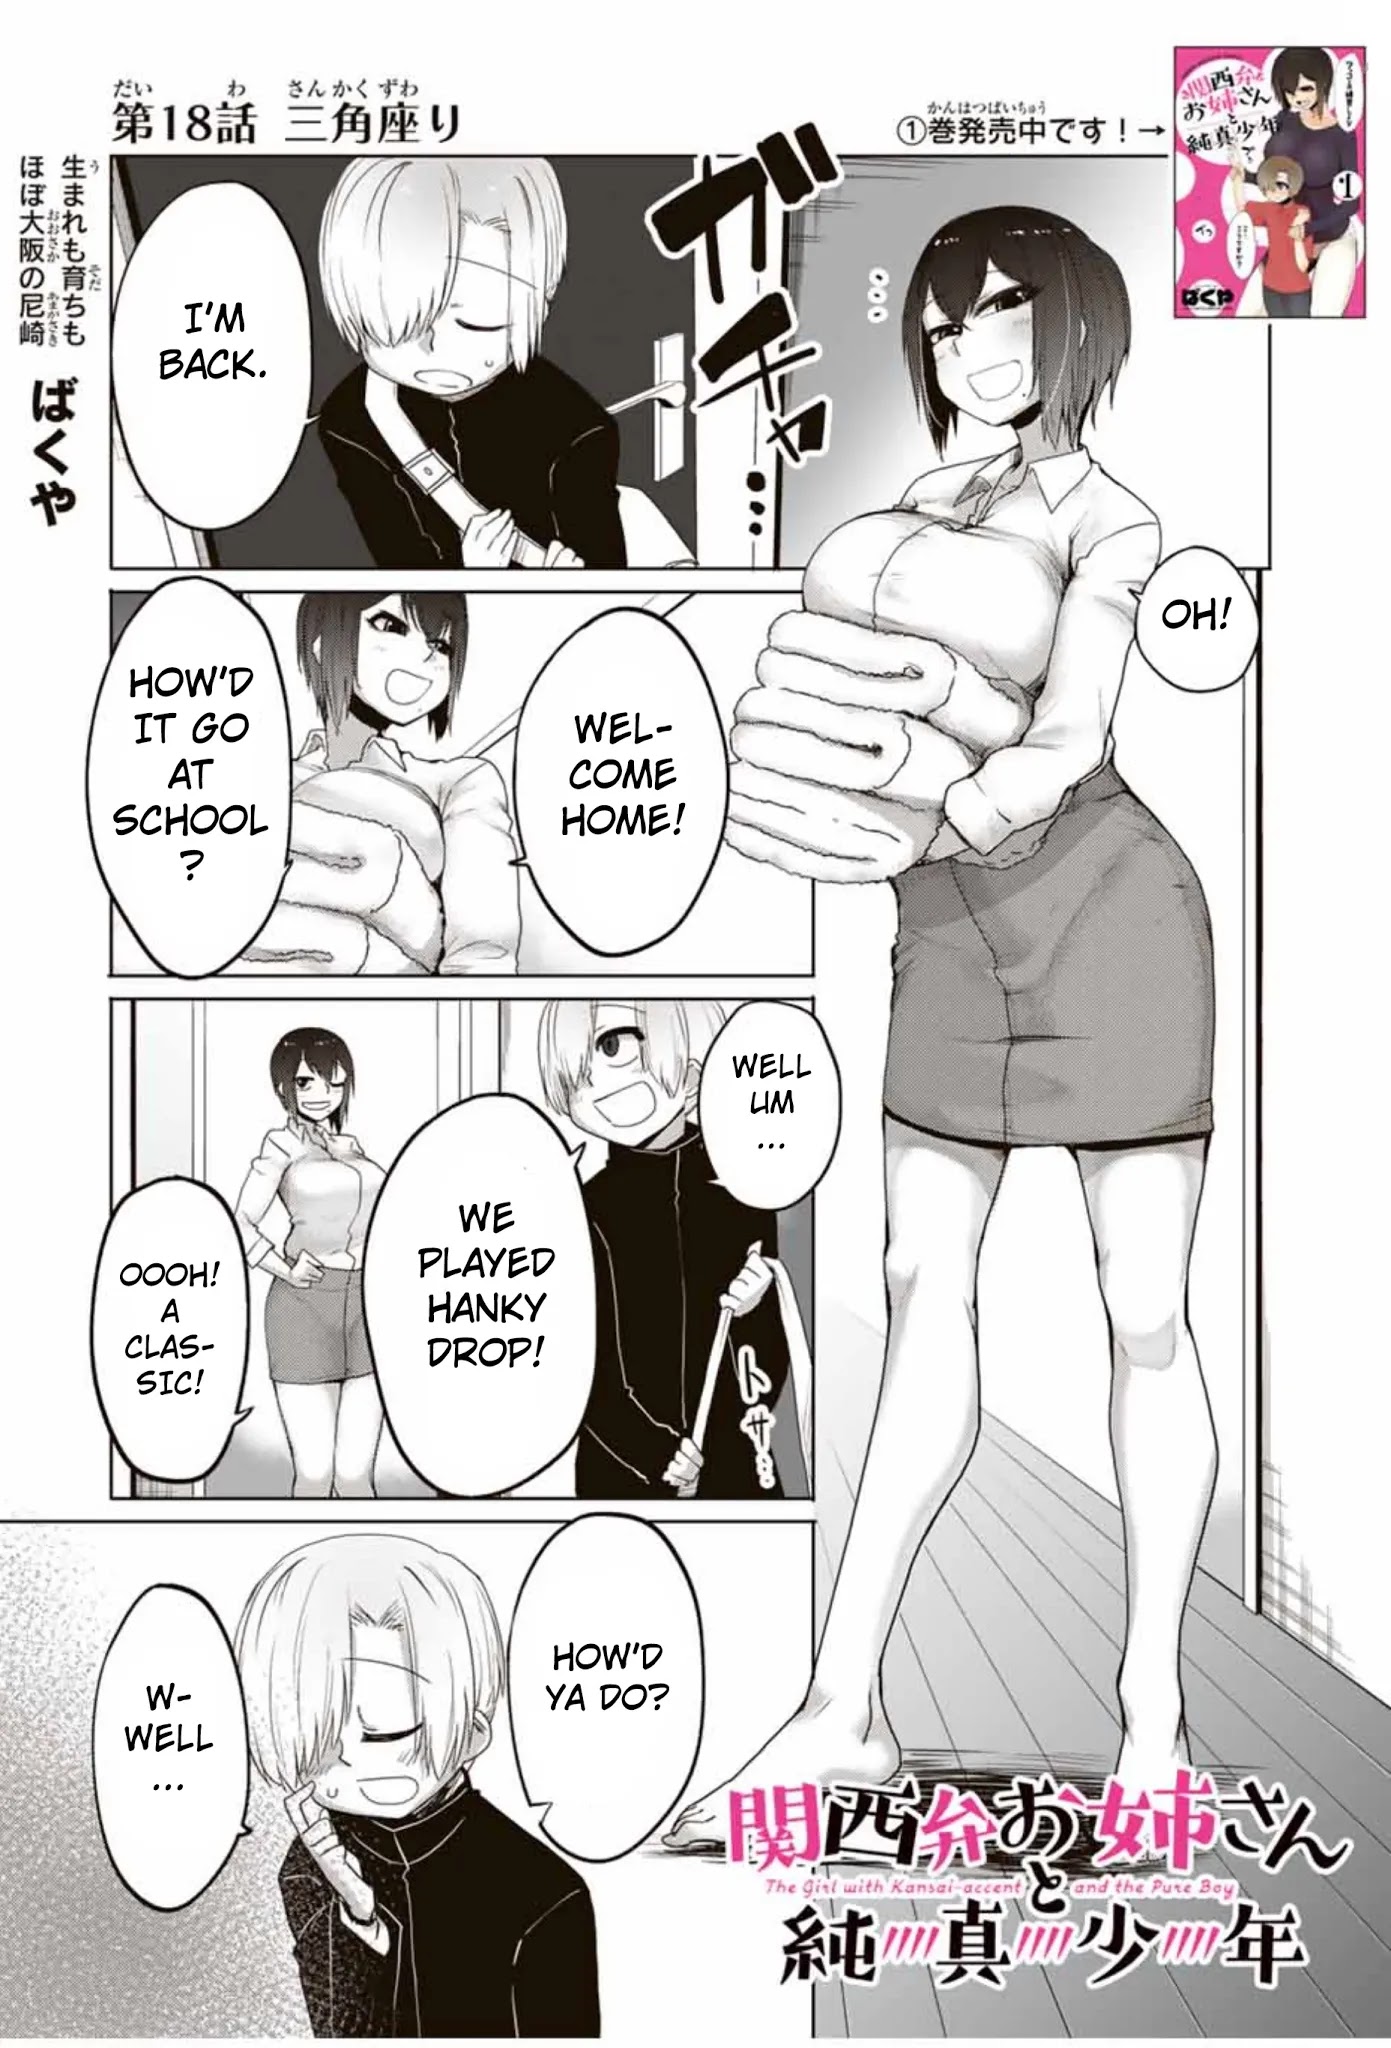 The Girl with a Kansai Accent and the Pure Boy Chapter 18 - Page 1